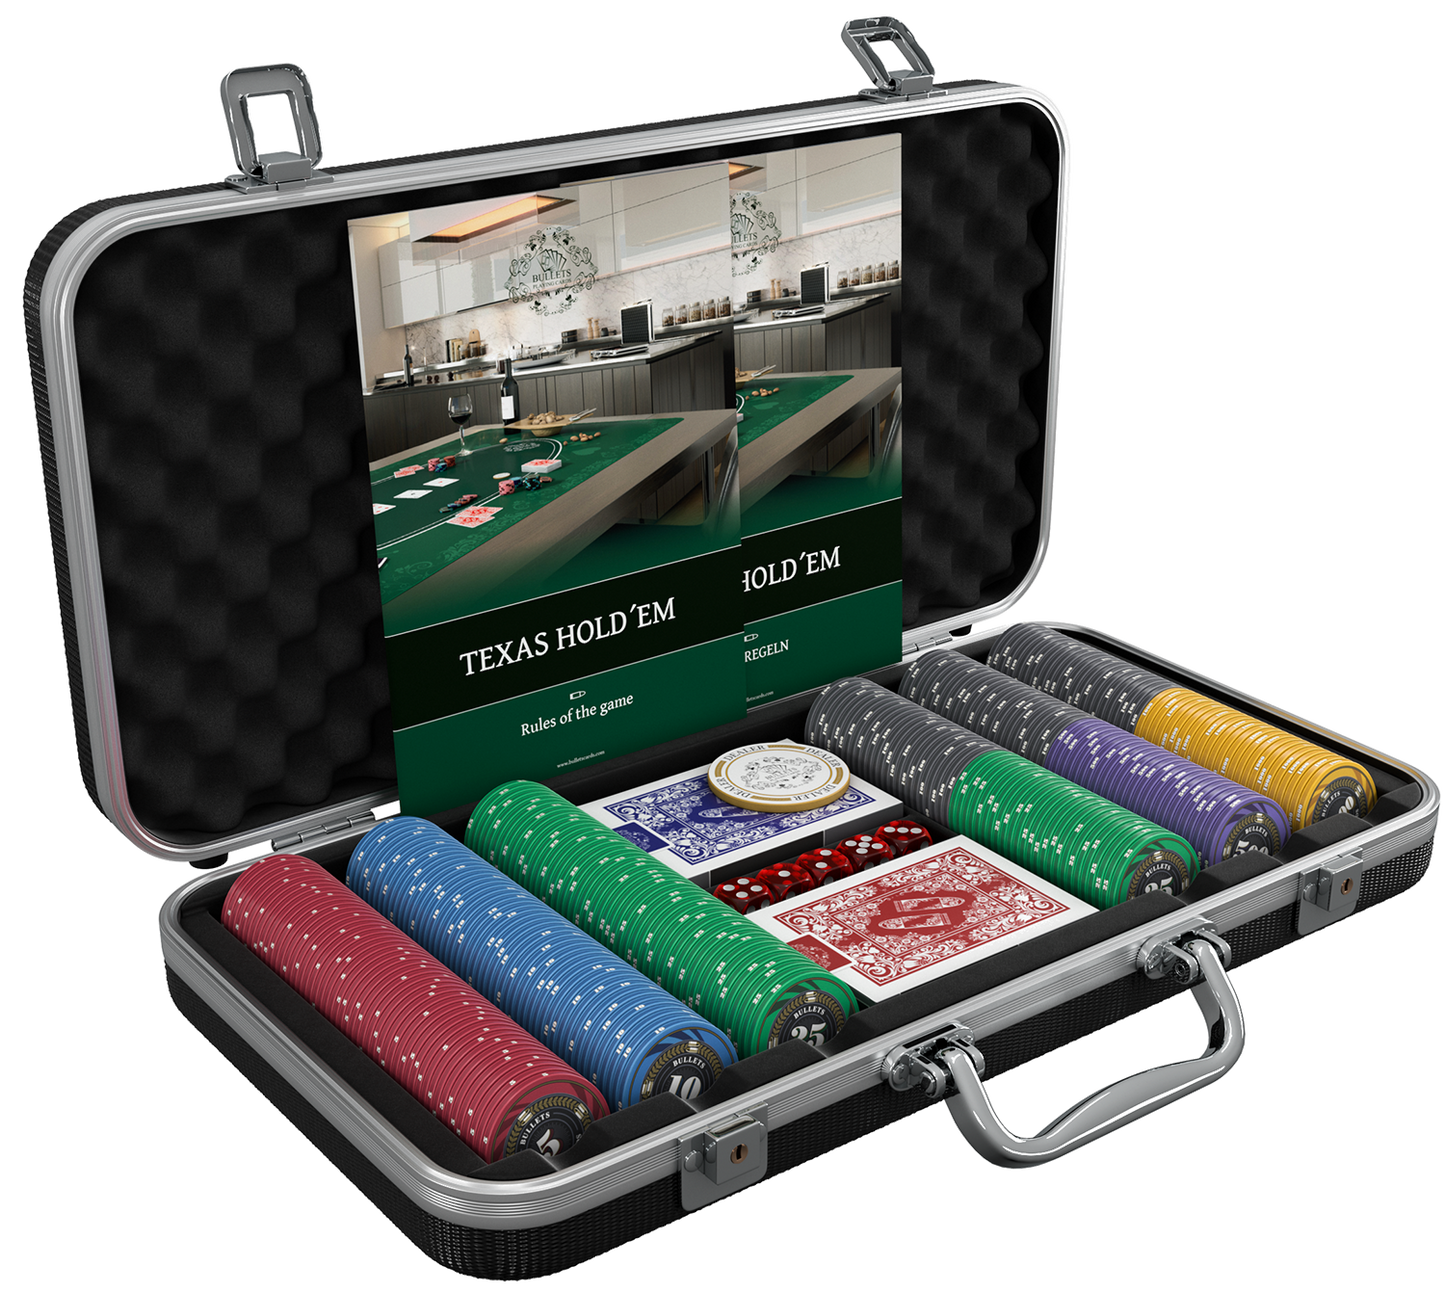 Poker case with 300 ceramic poker chips "Silvio" with values